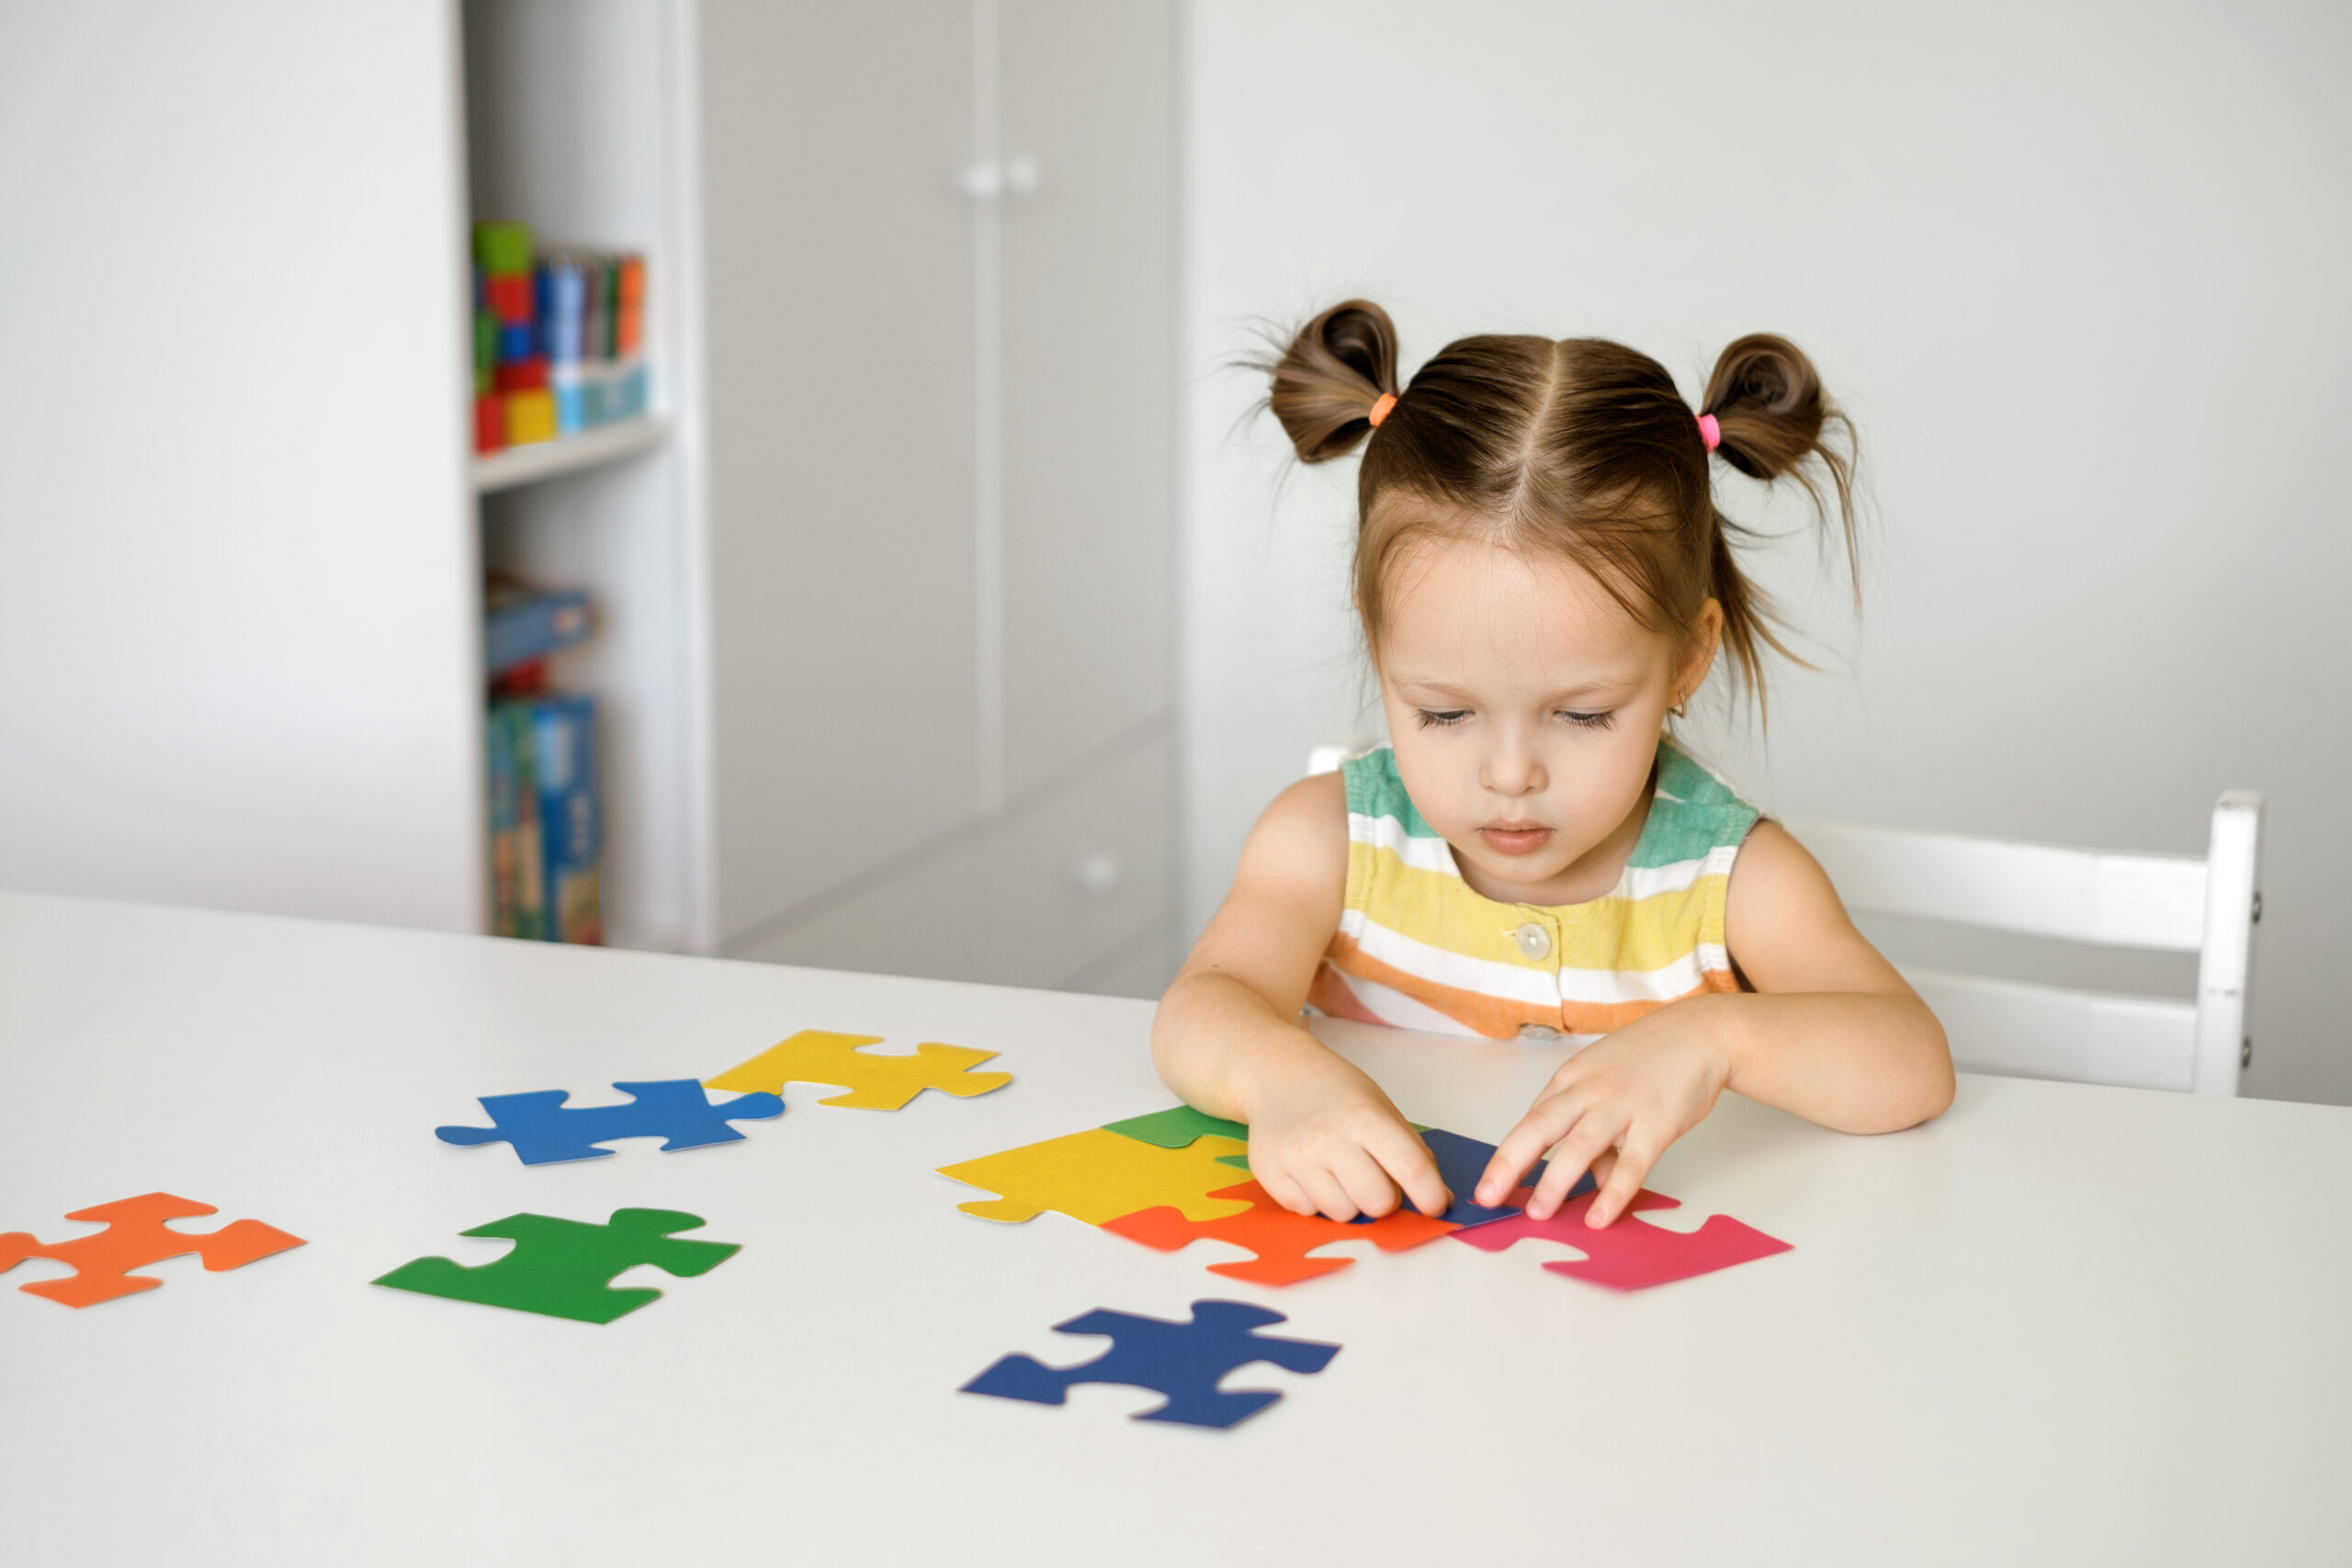 twoyearold-girl-collects-puzzles-sitting-table-nursery